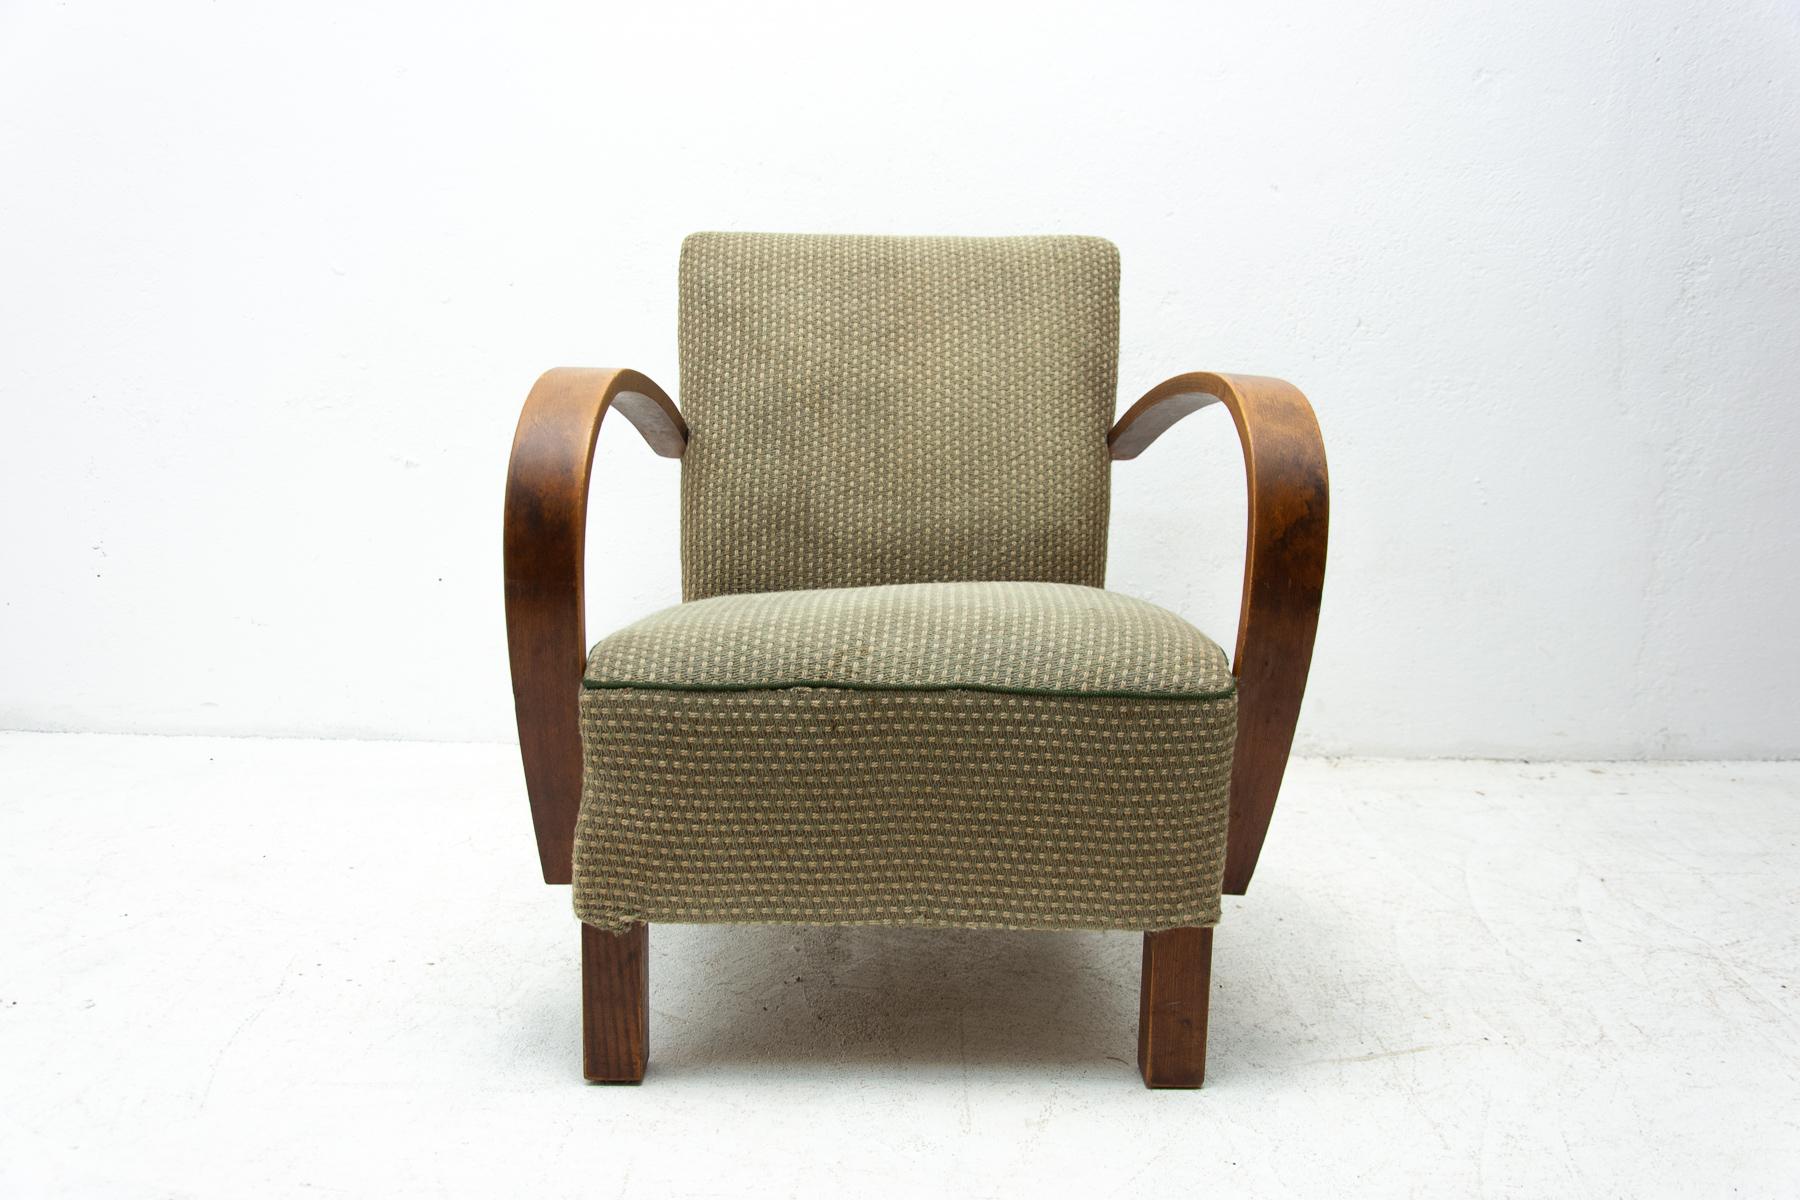 This bentwood armchair called “C” was designed by Jindrich Halabala and was made by UP Závody in the 1950s. The chair is stable and comfortable and in a good structurally condition.

The fabric shows signs of age and use.

Measures: Seat height